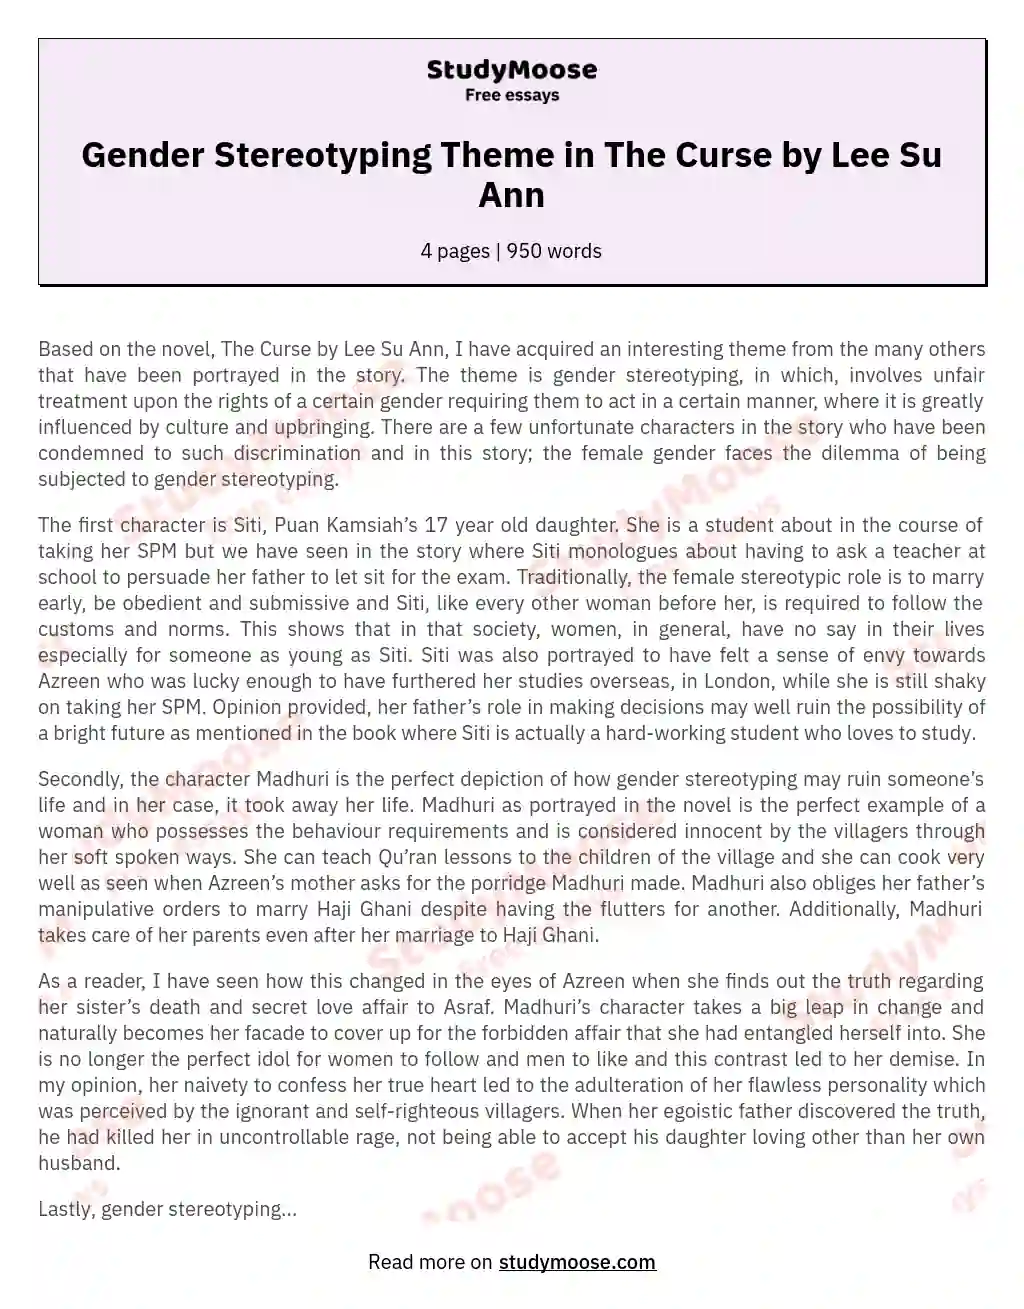 Gender Stereotyping Theme in The Curse by Lee Su Ann essay